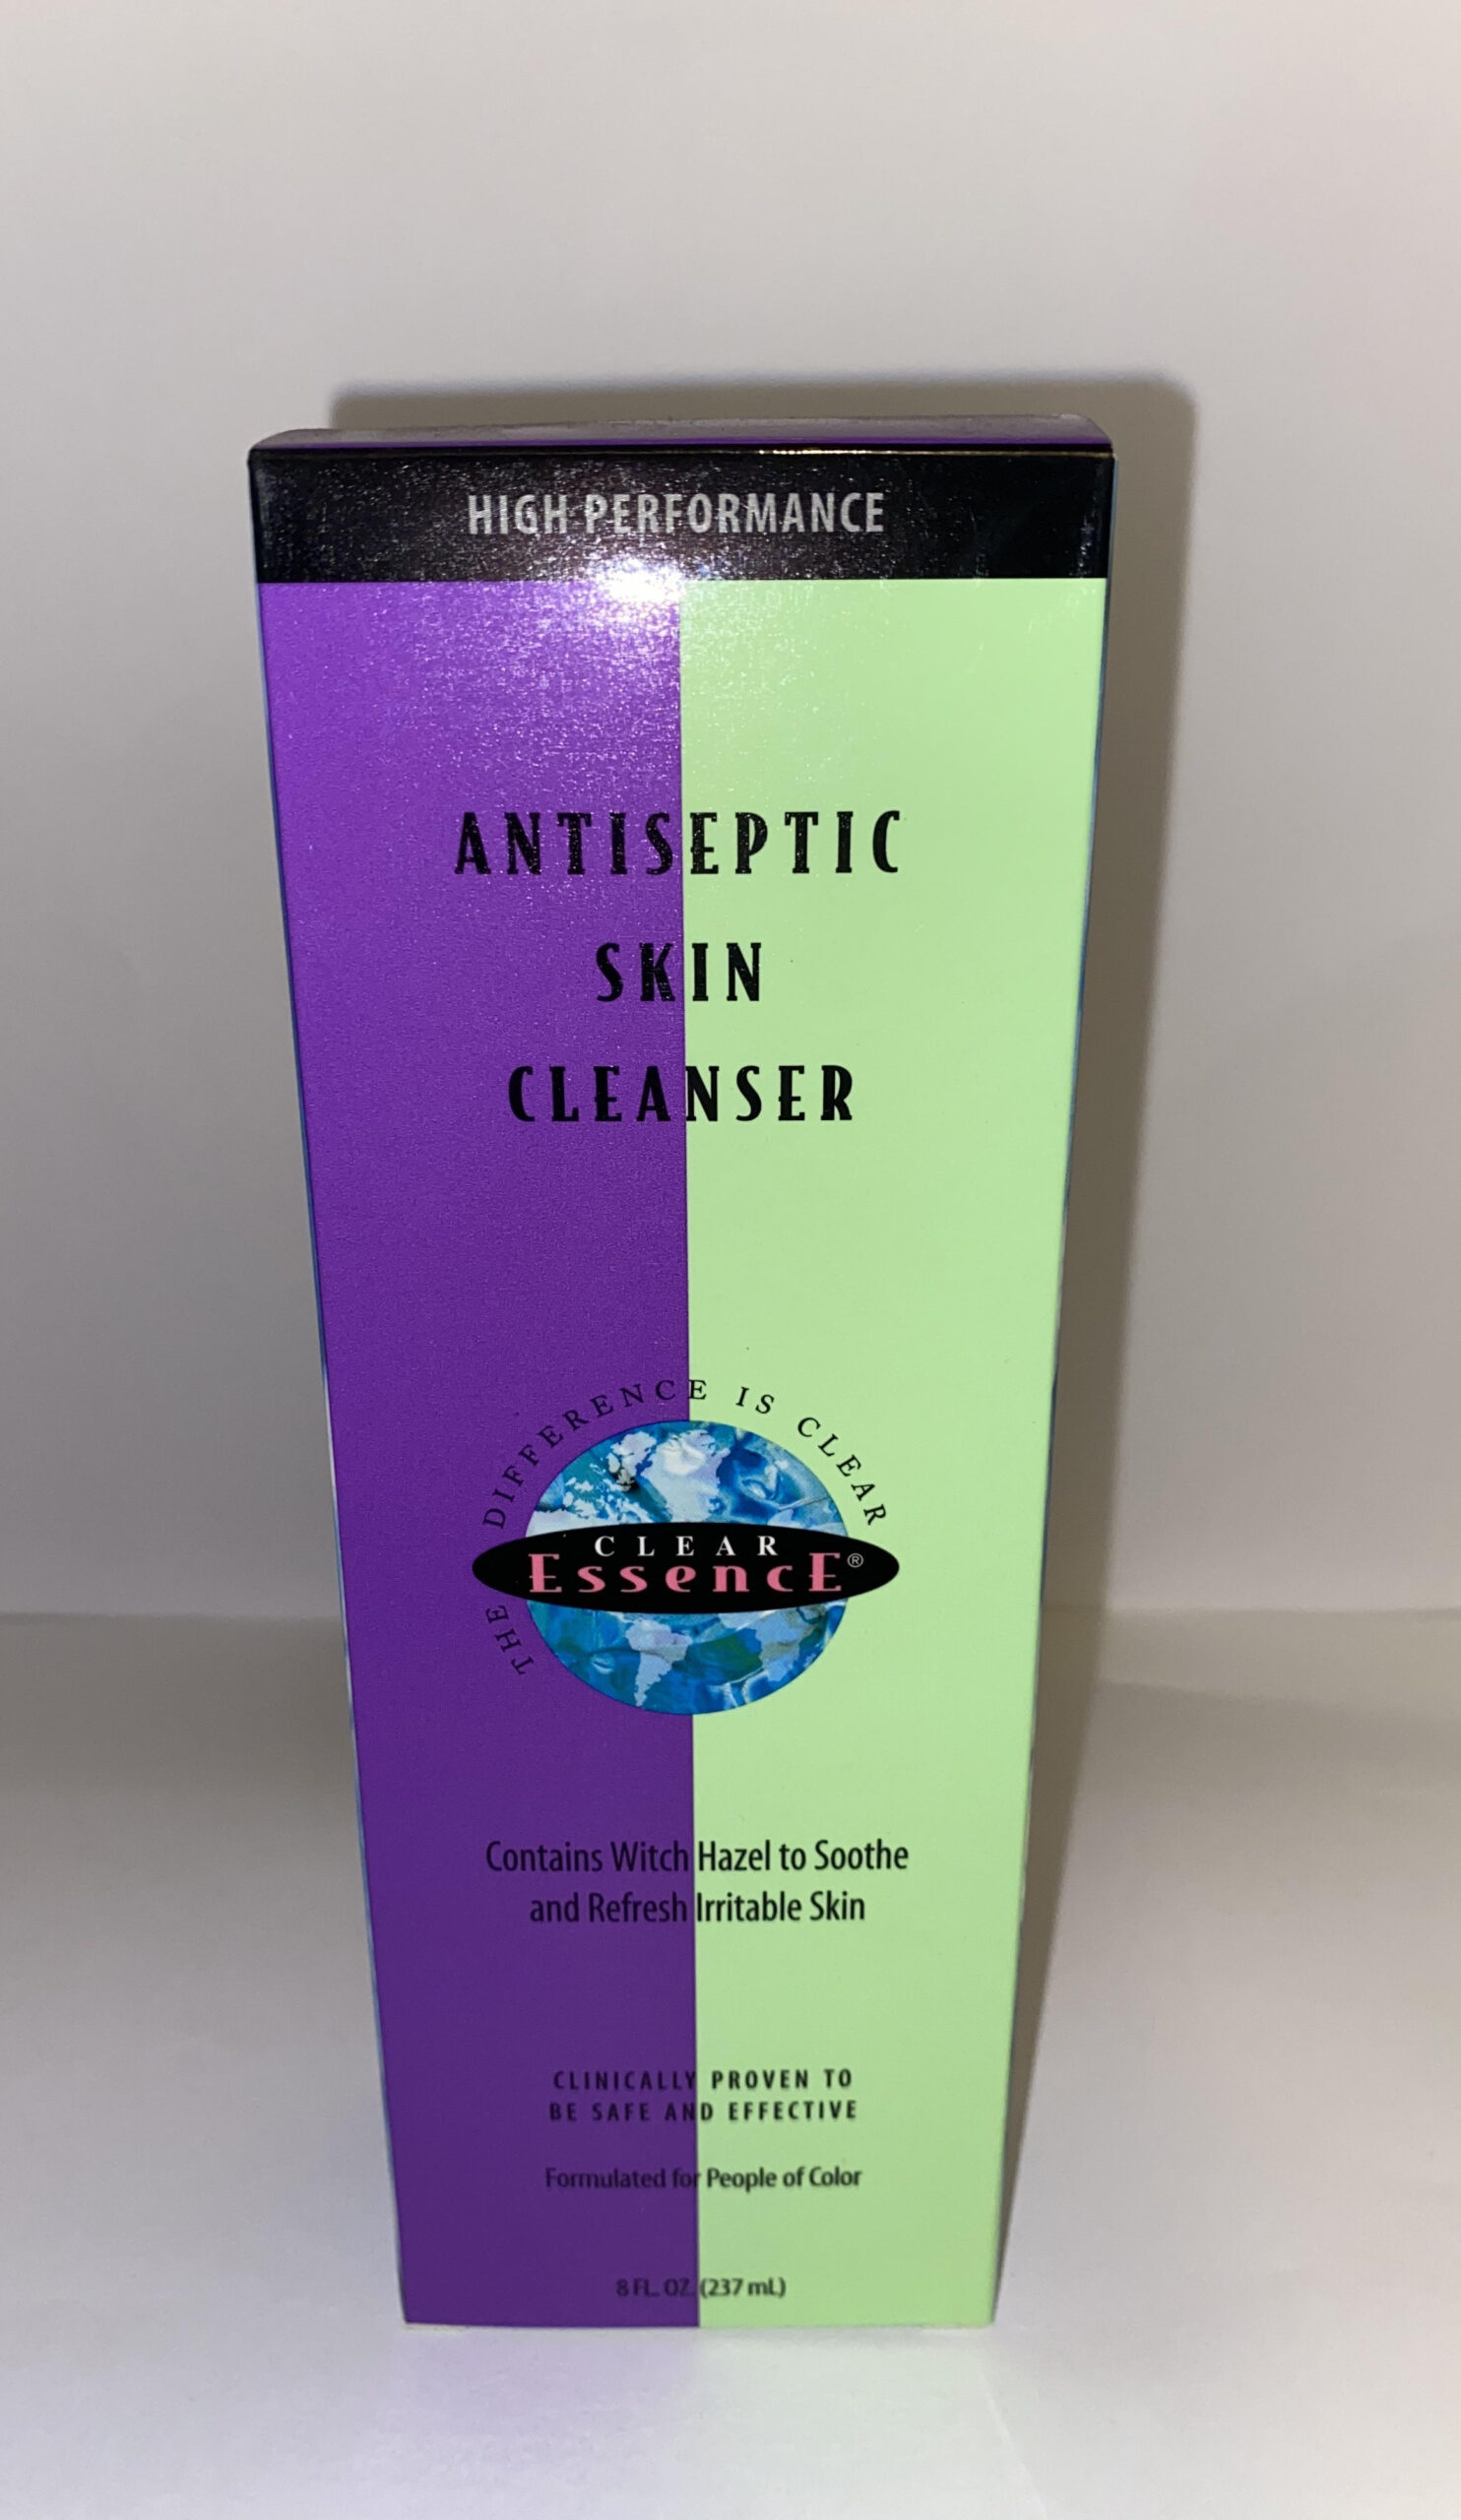 ANTISEPTIC SKIN CLEANSER scaled